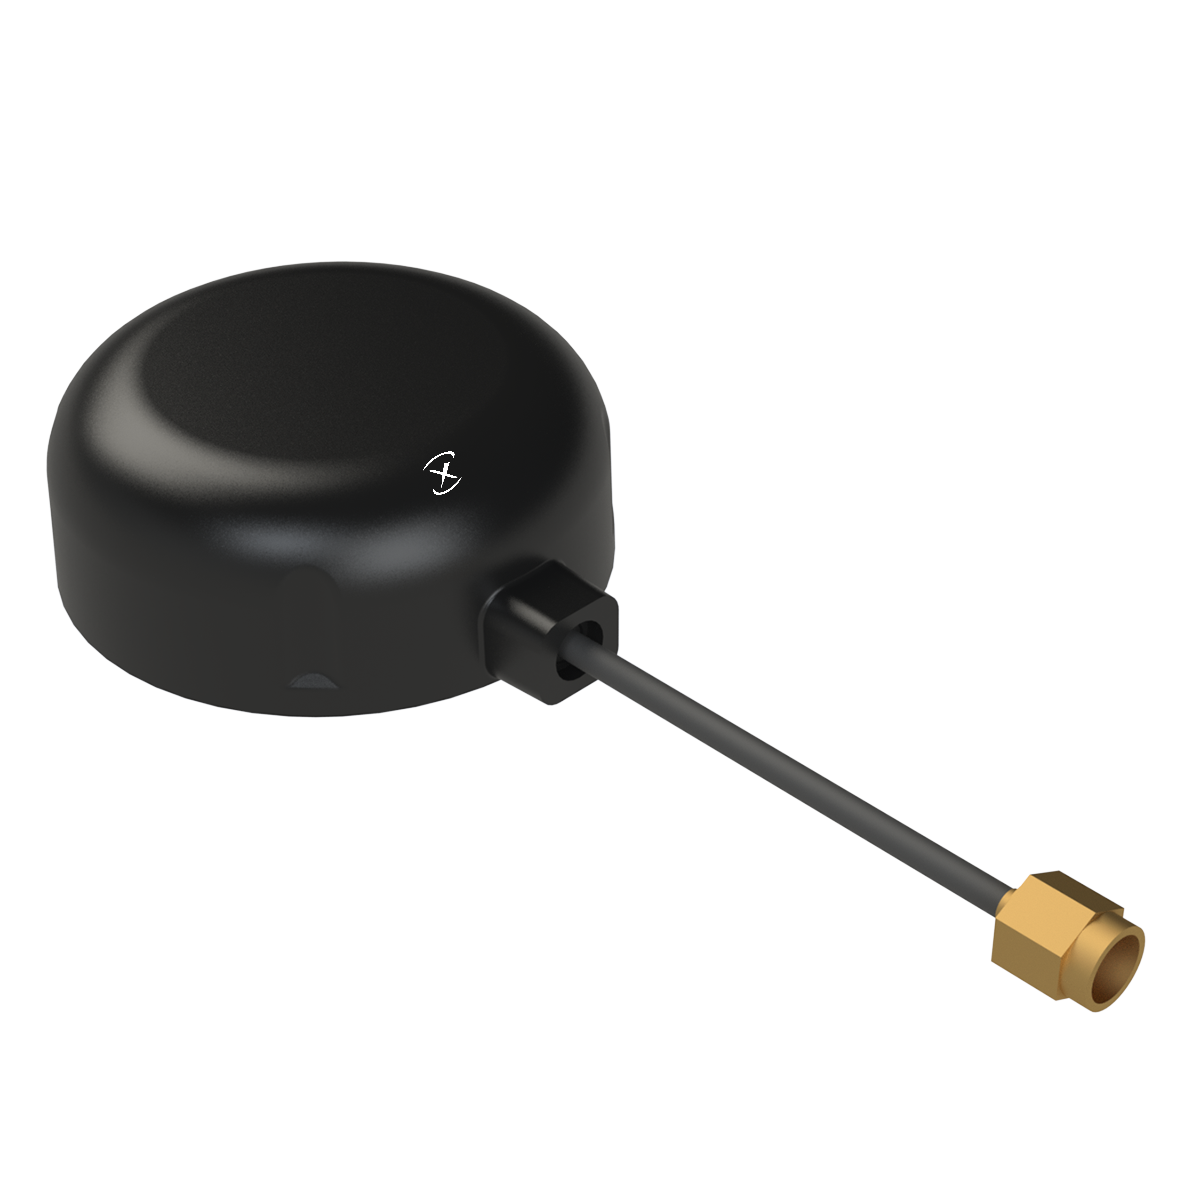 2.4 GHz ISM Magnetic Mount antenna